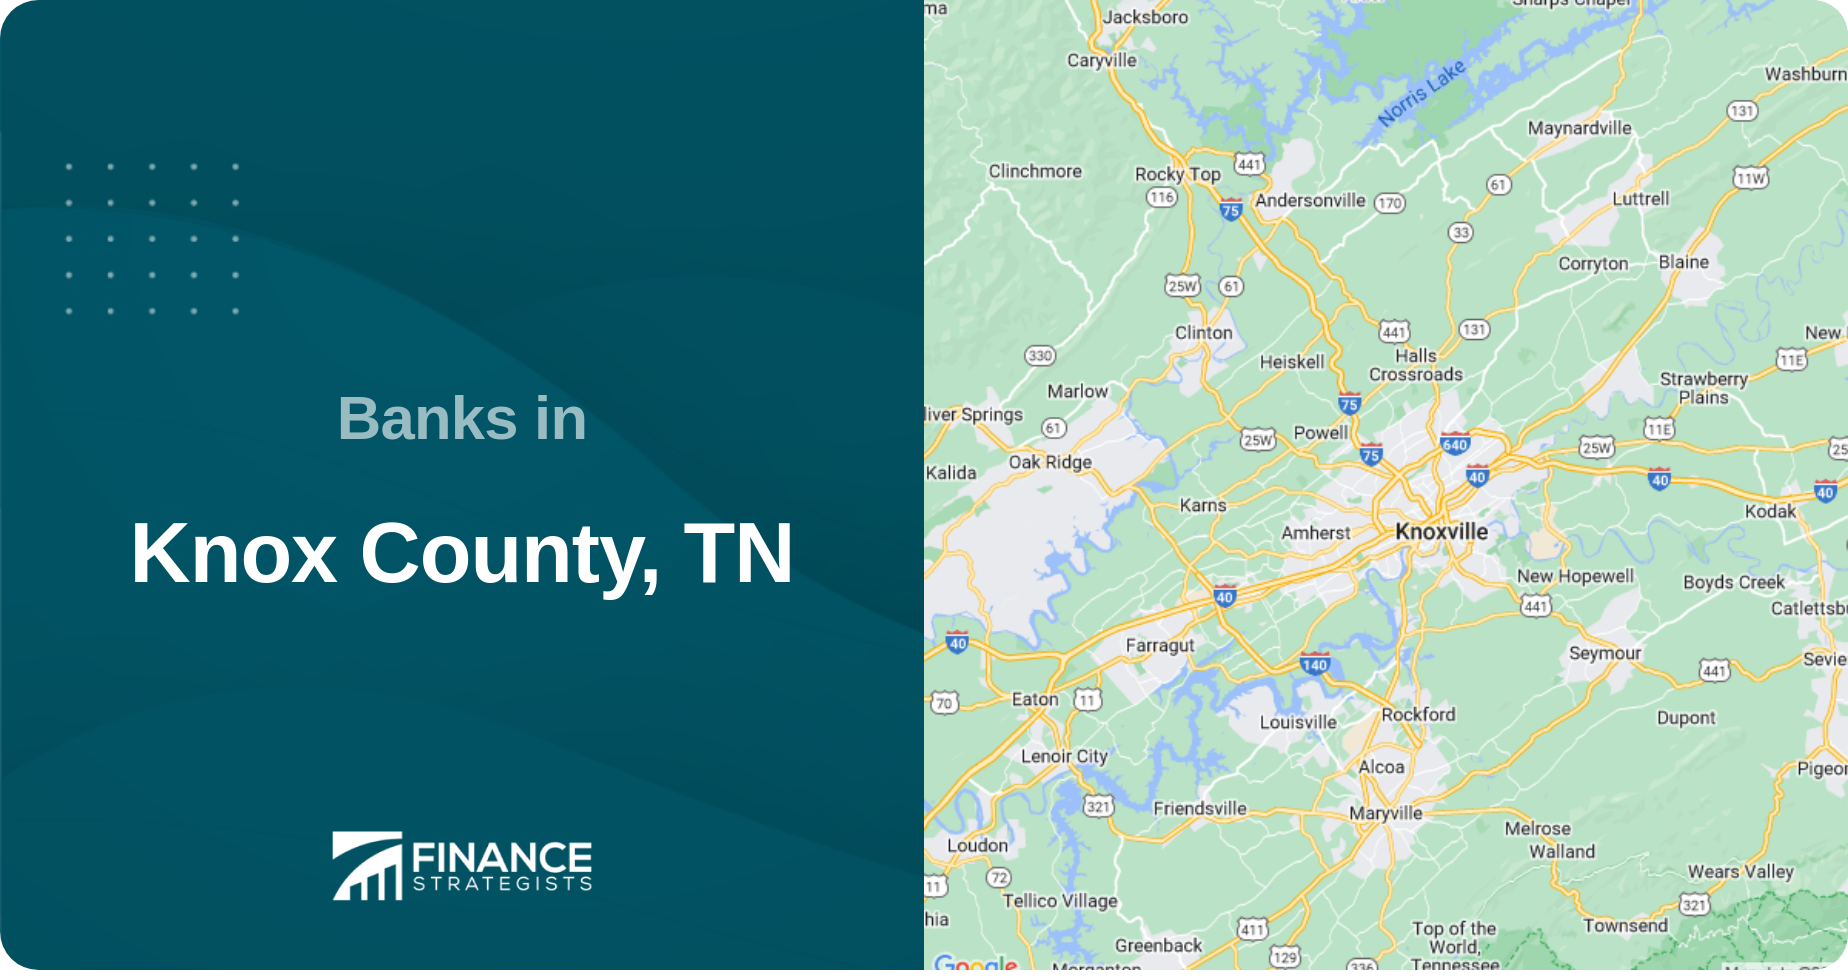 Banks in Knox County, TN